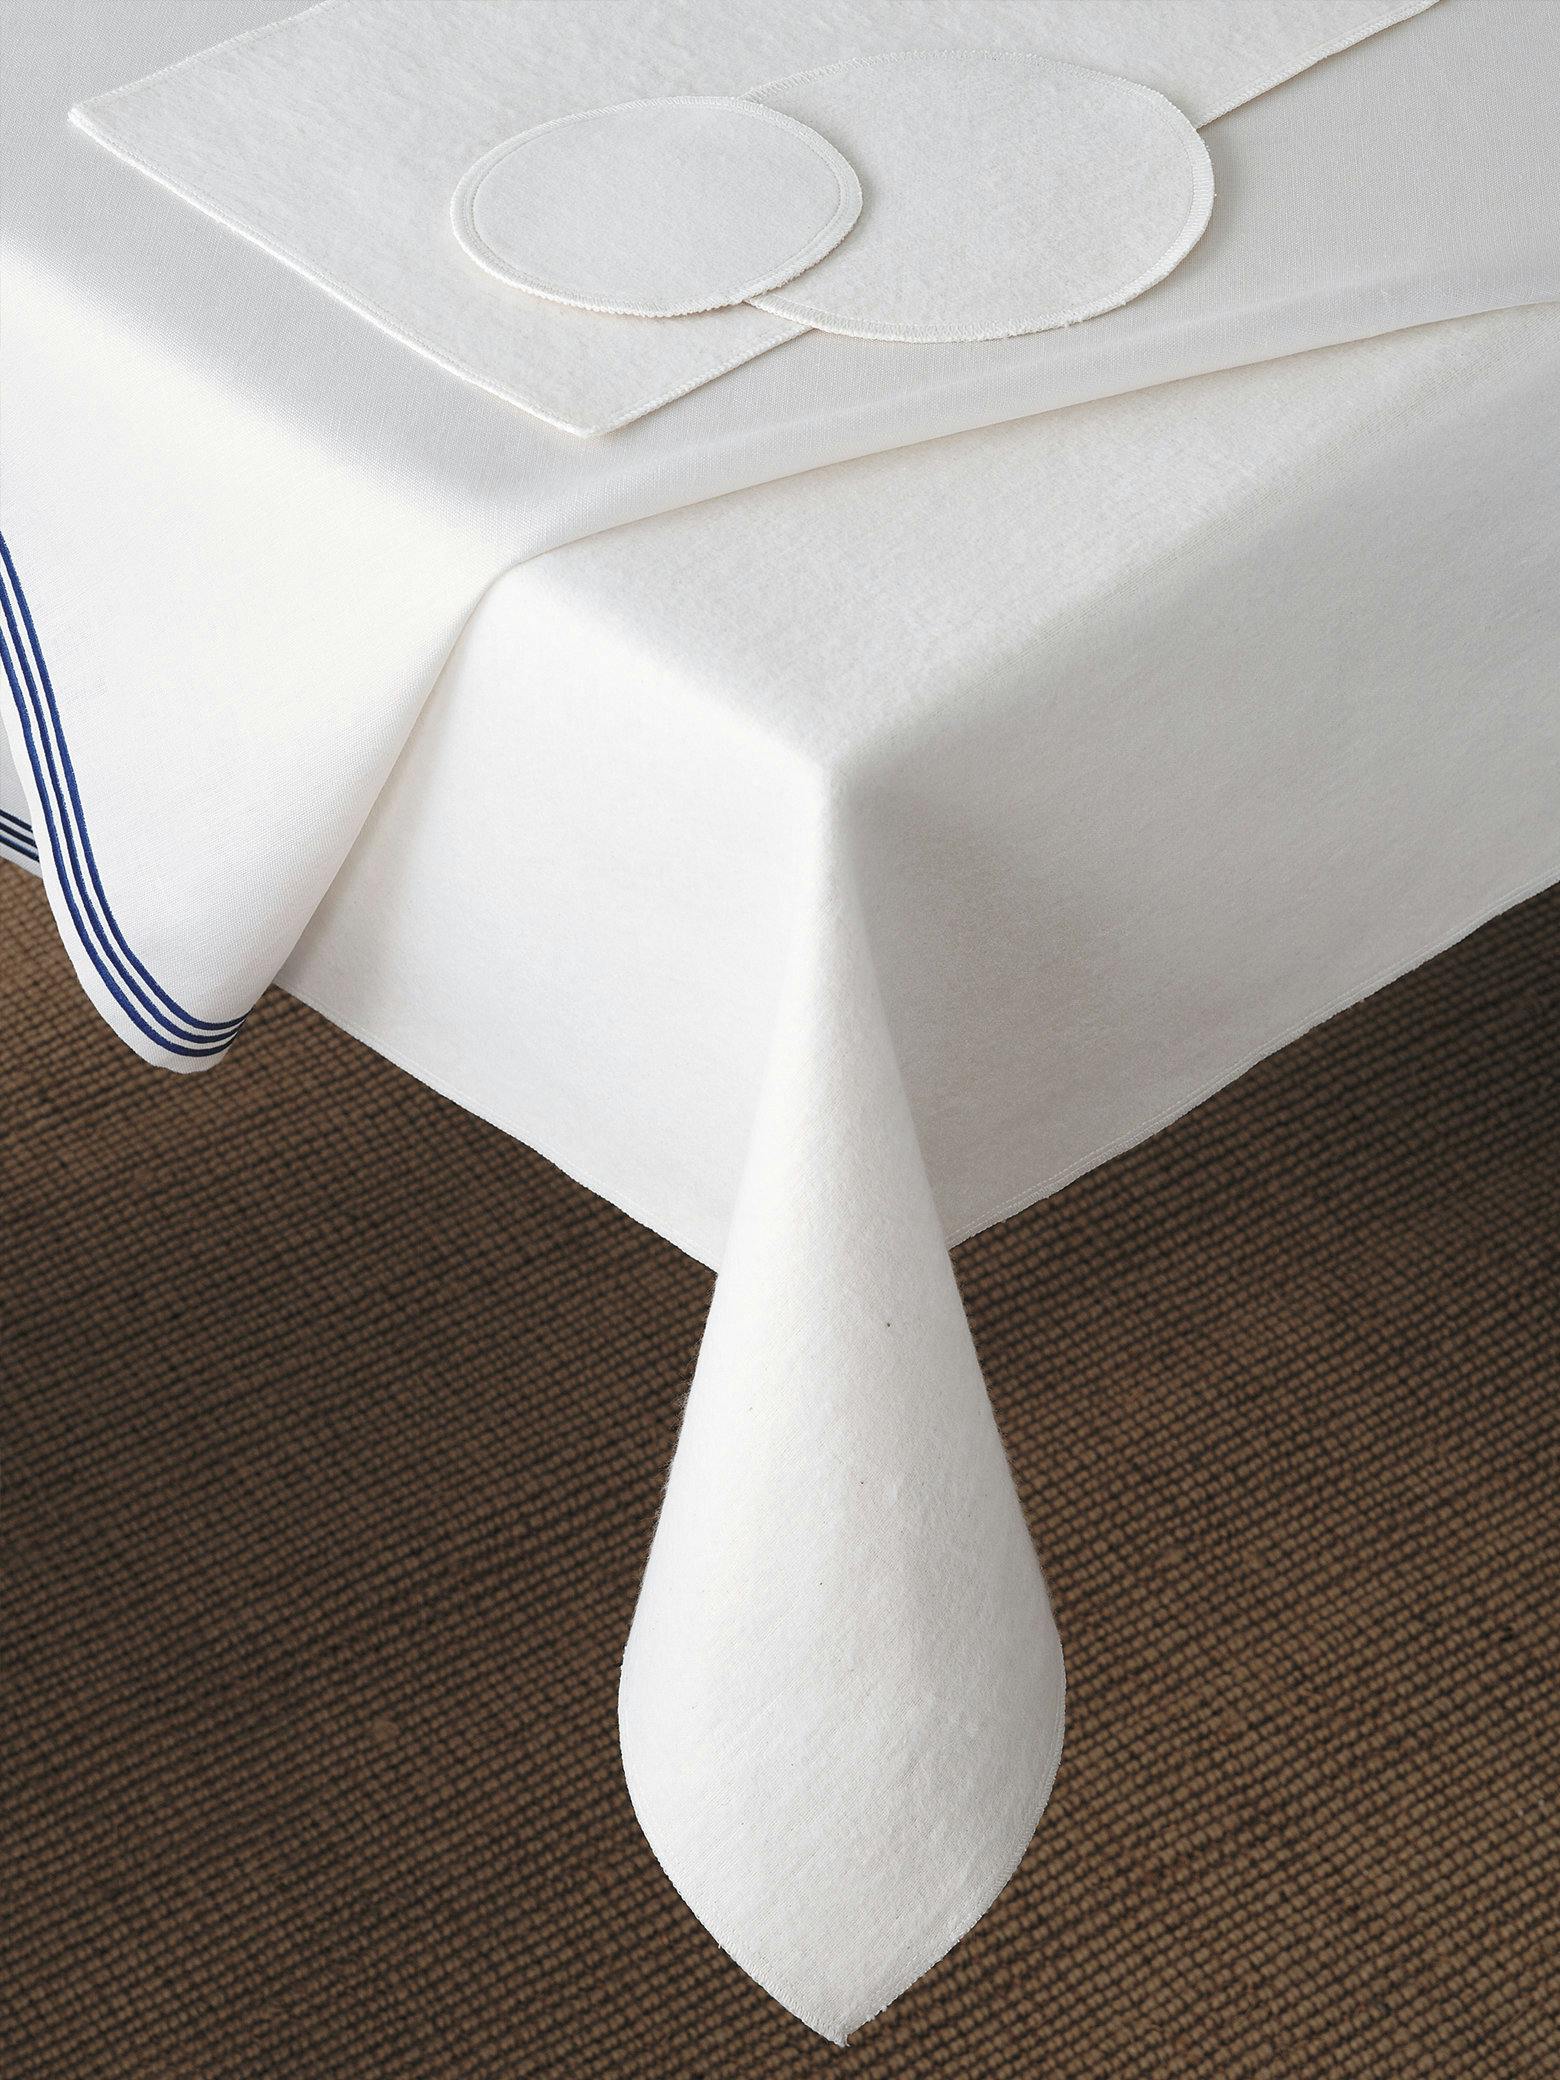 Heat Resistant Table Protector Fabric White 140cm - Abakhan